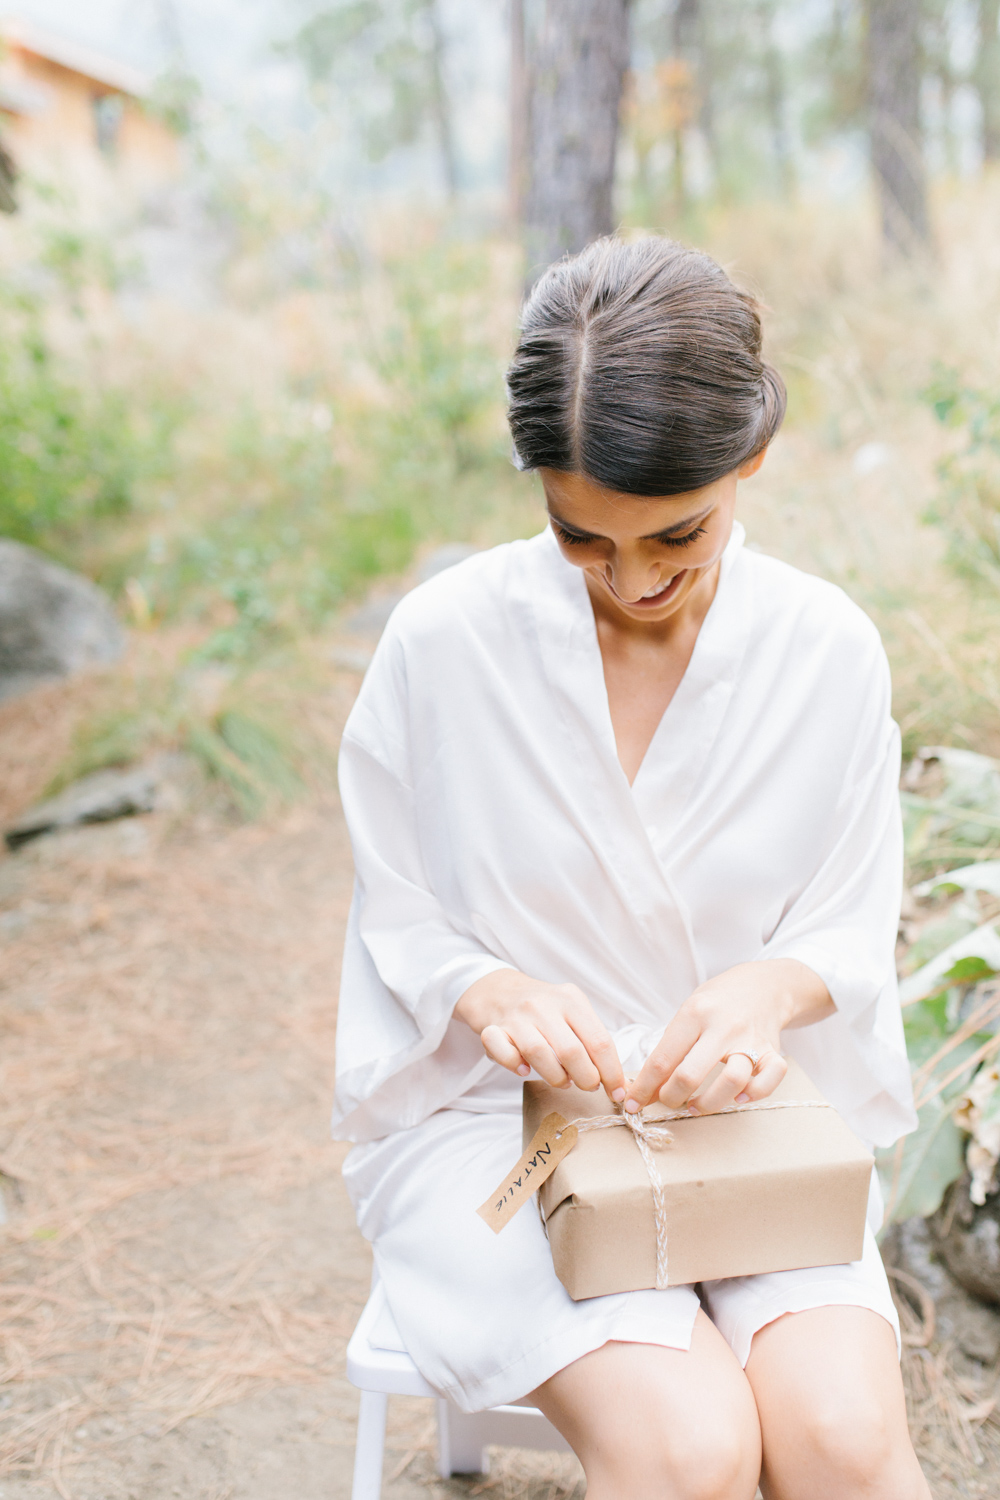 Grey and White Wedding in the Mountains of Leavenworth, Washington | Sleeping Lady | Classic and Timeless Wedding | VSCO | Bride and Bridesmaids Getting Ready | Bride in Victoria Secret Robe.jpg-1780.jpg